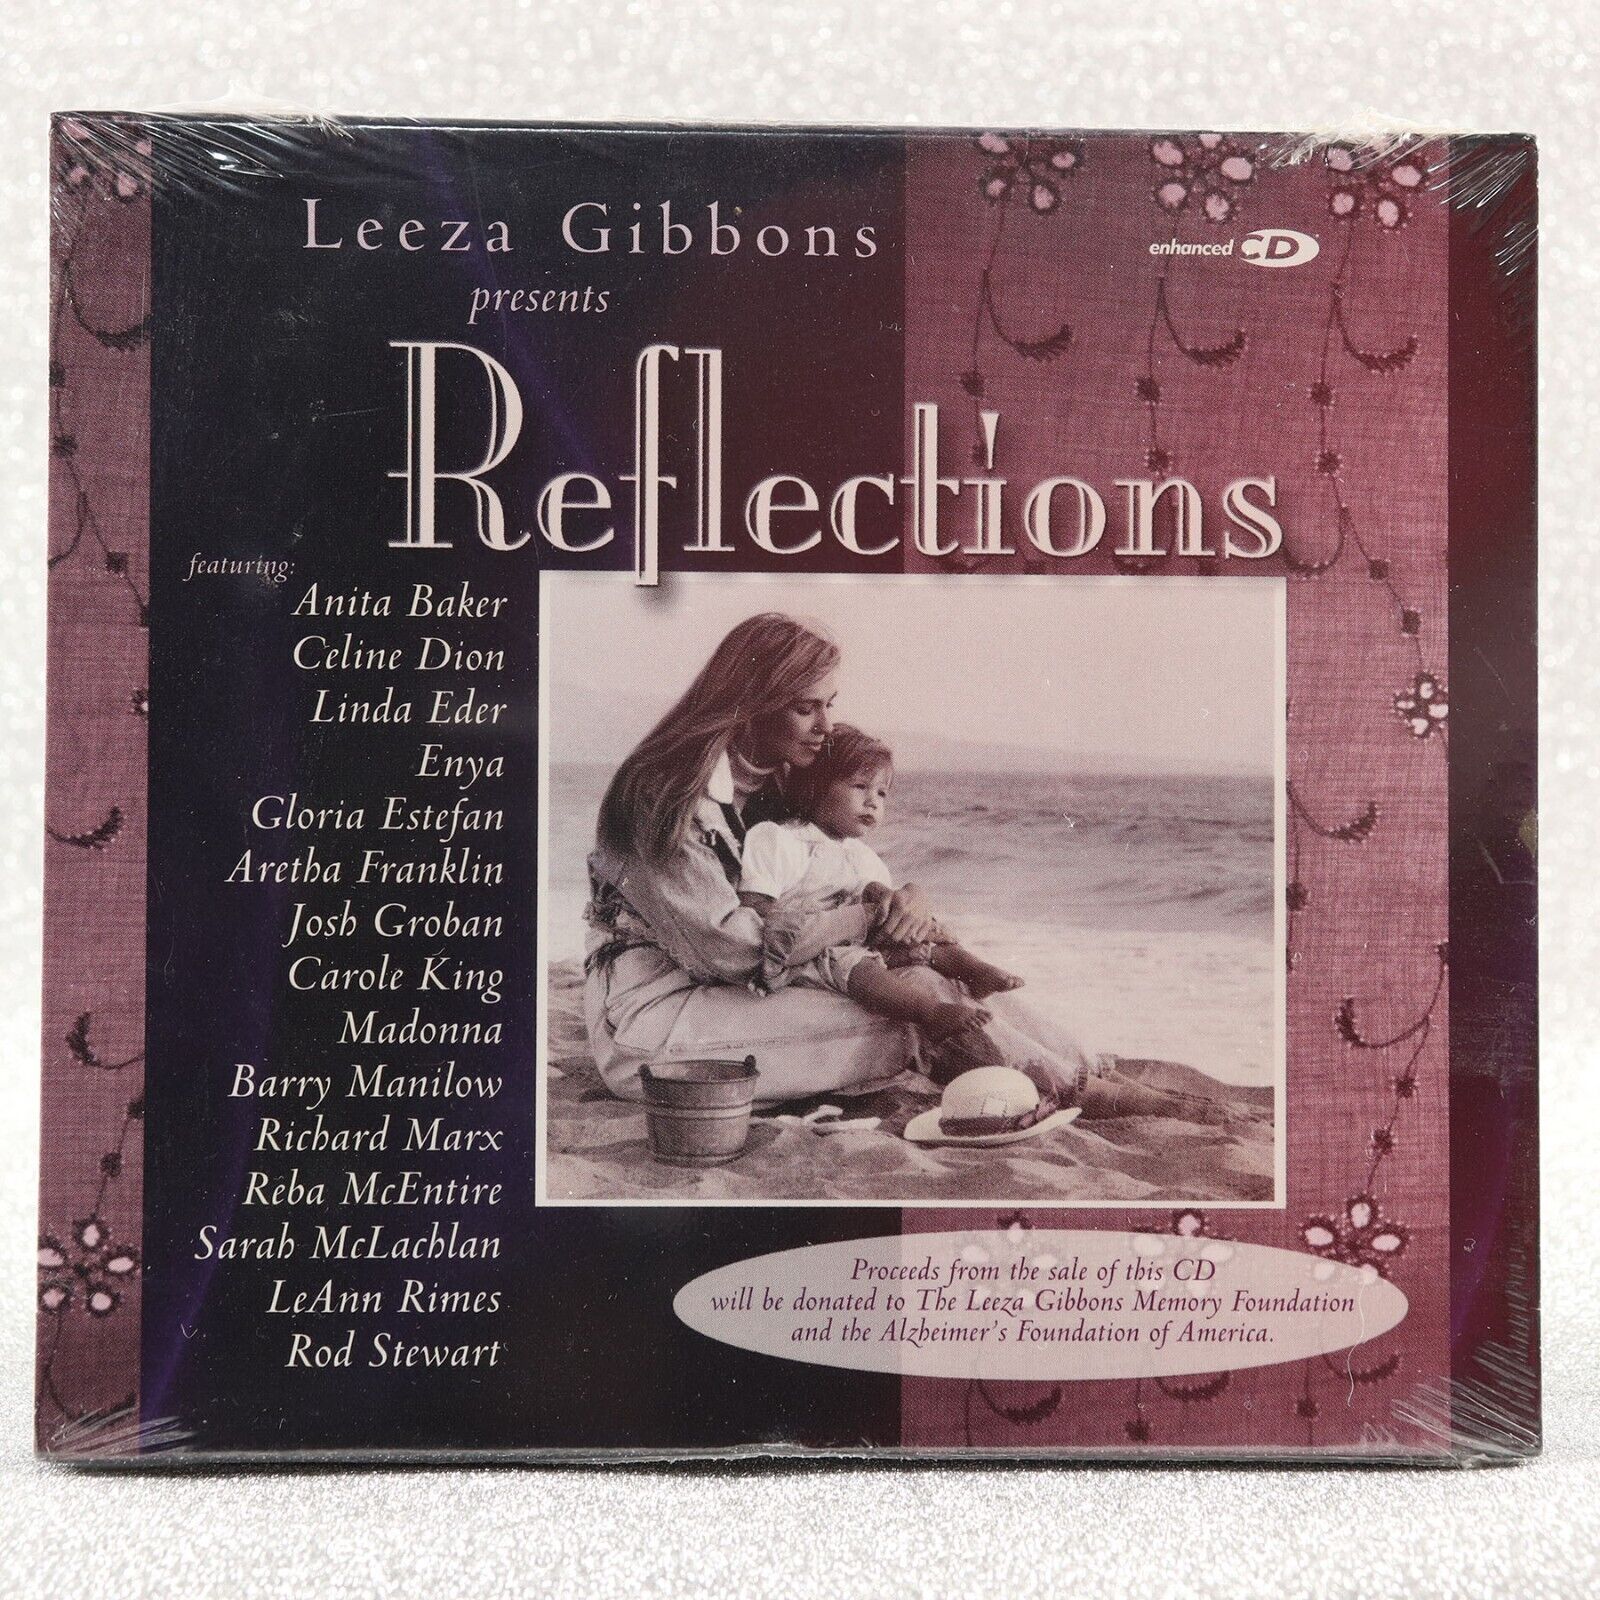 Leeza Gibbons Presents Reflections by Various Artists (CD, Sep-2004) NEW SEALED